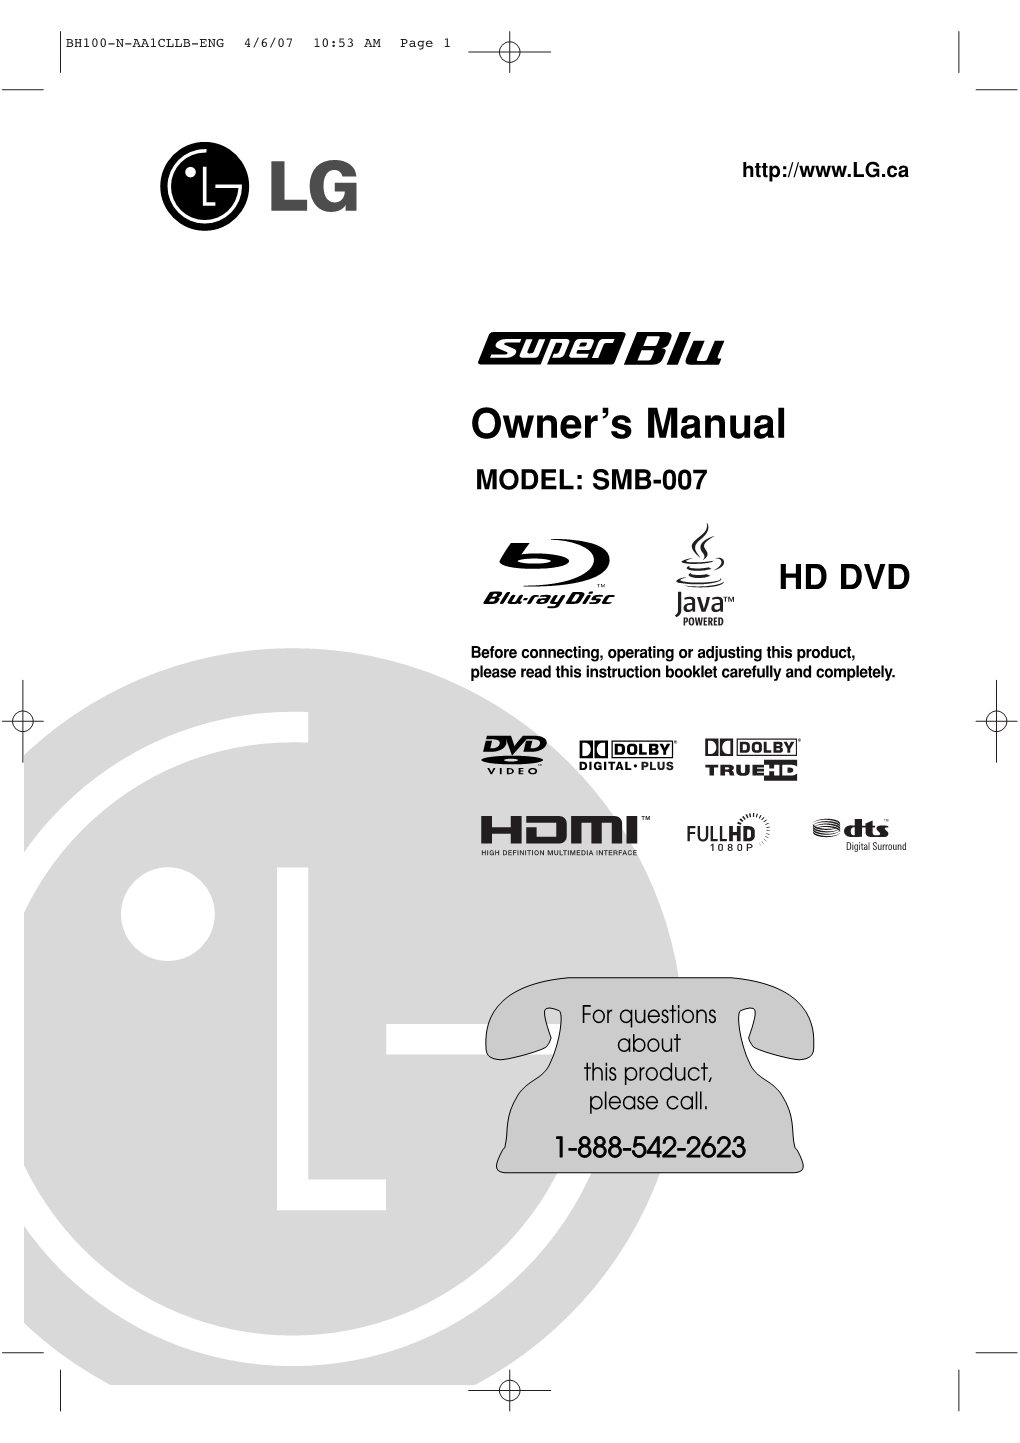 Owner's Manual to Be Certain